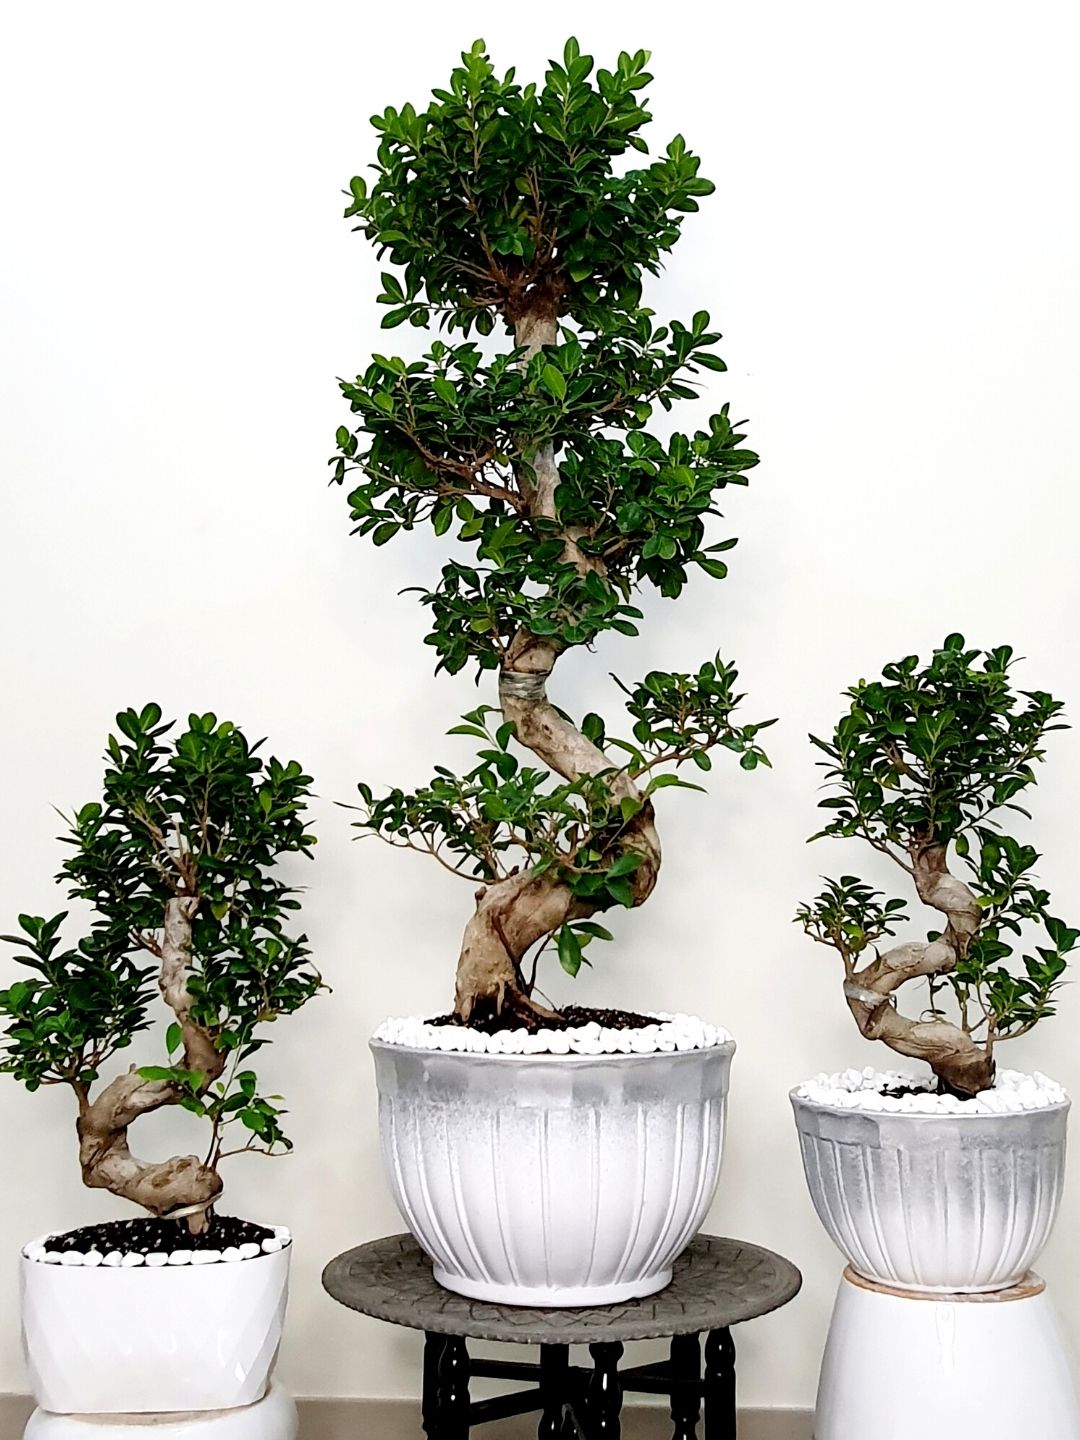 Potted XL Bonsai Tree - S Shape Planted in Ceramic Tall White Pot with Moss Topping